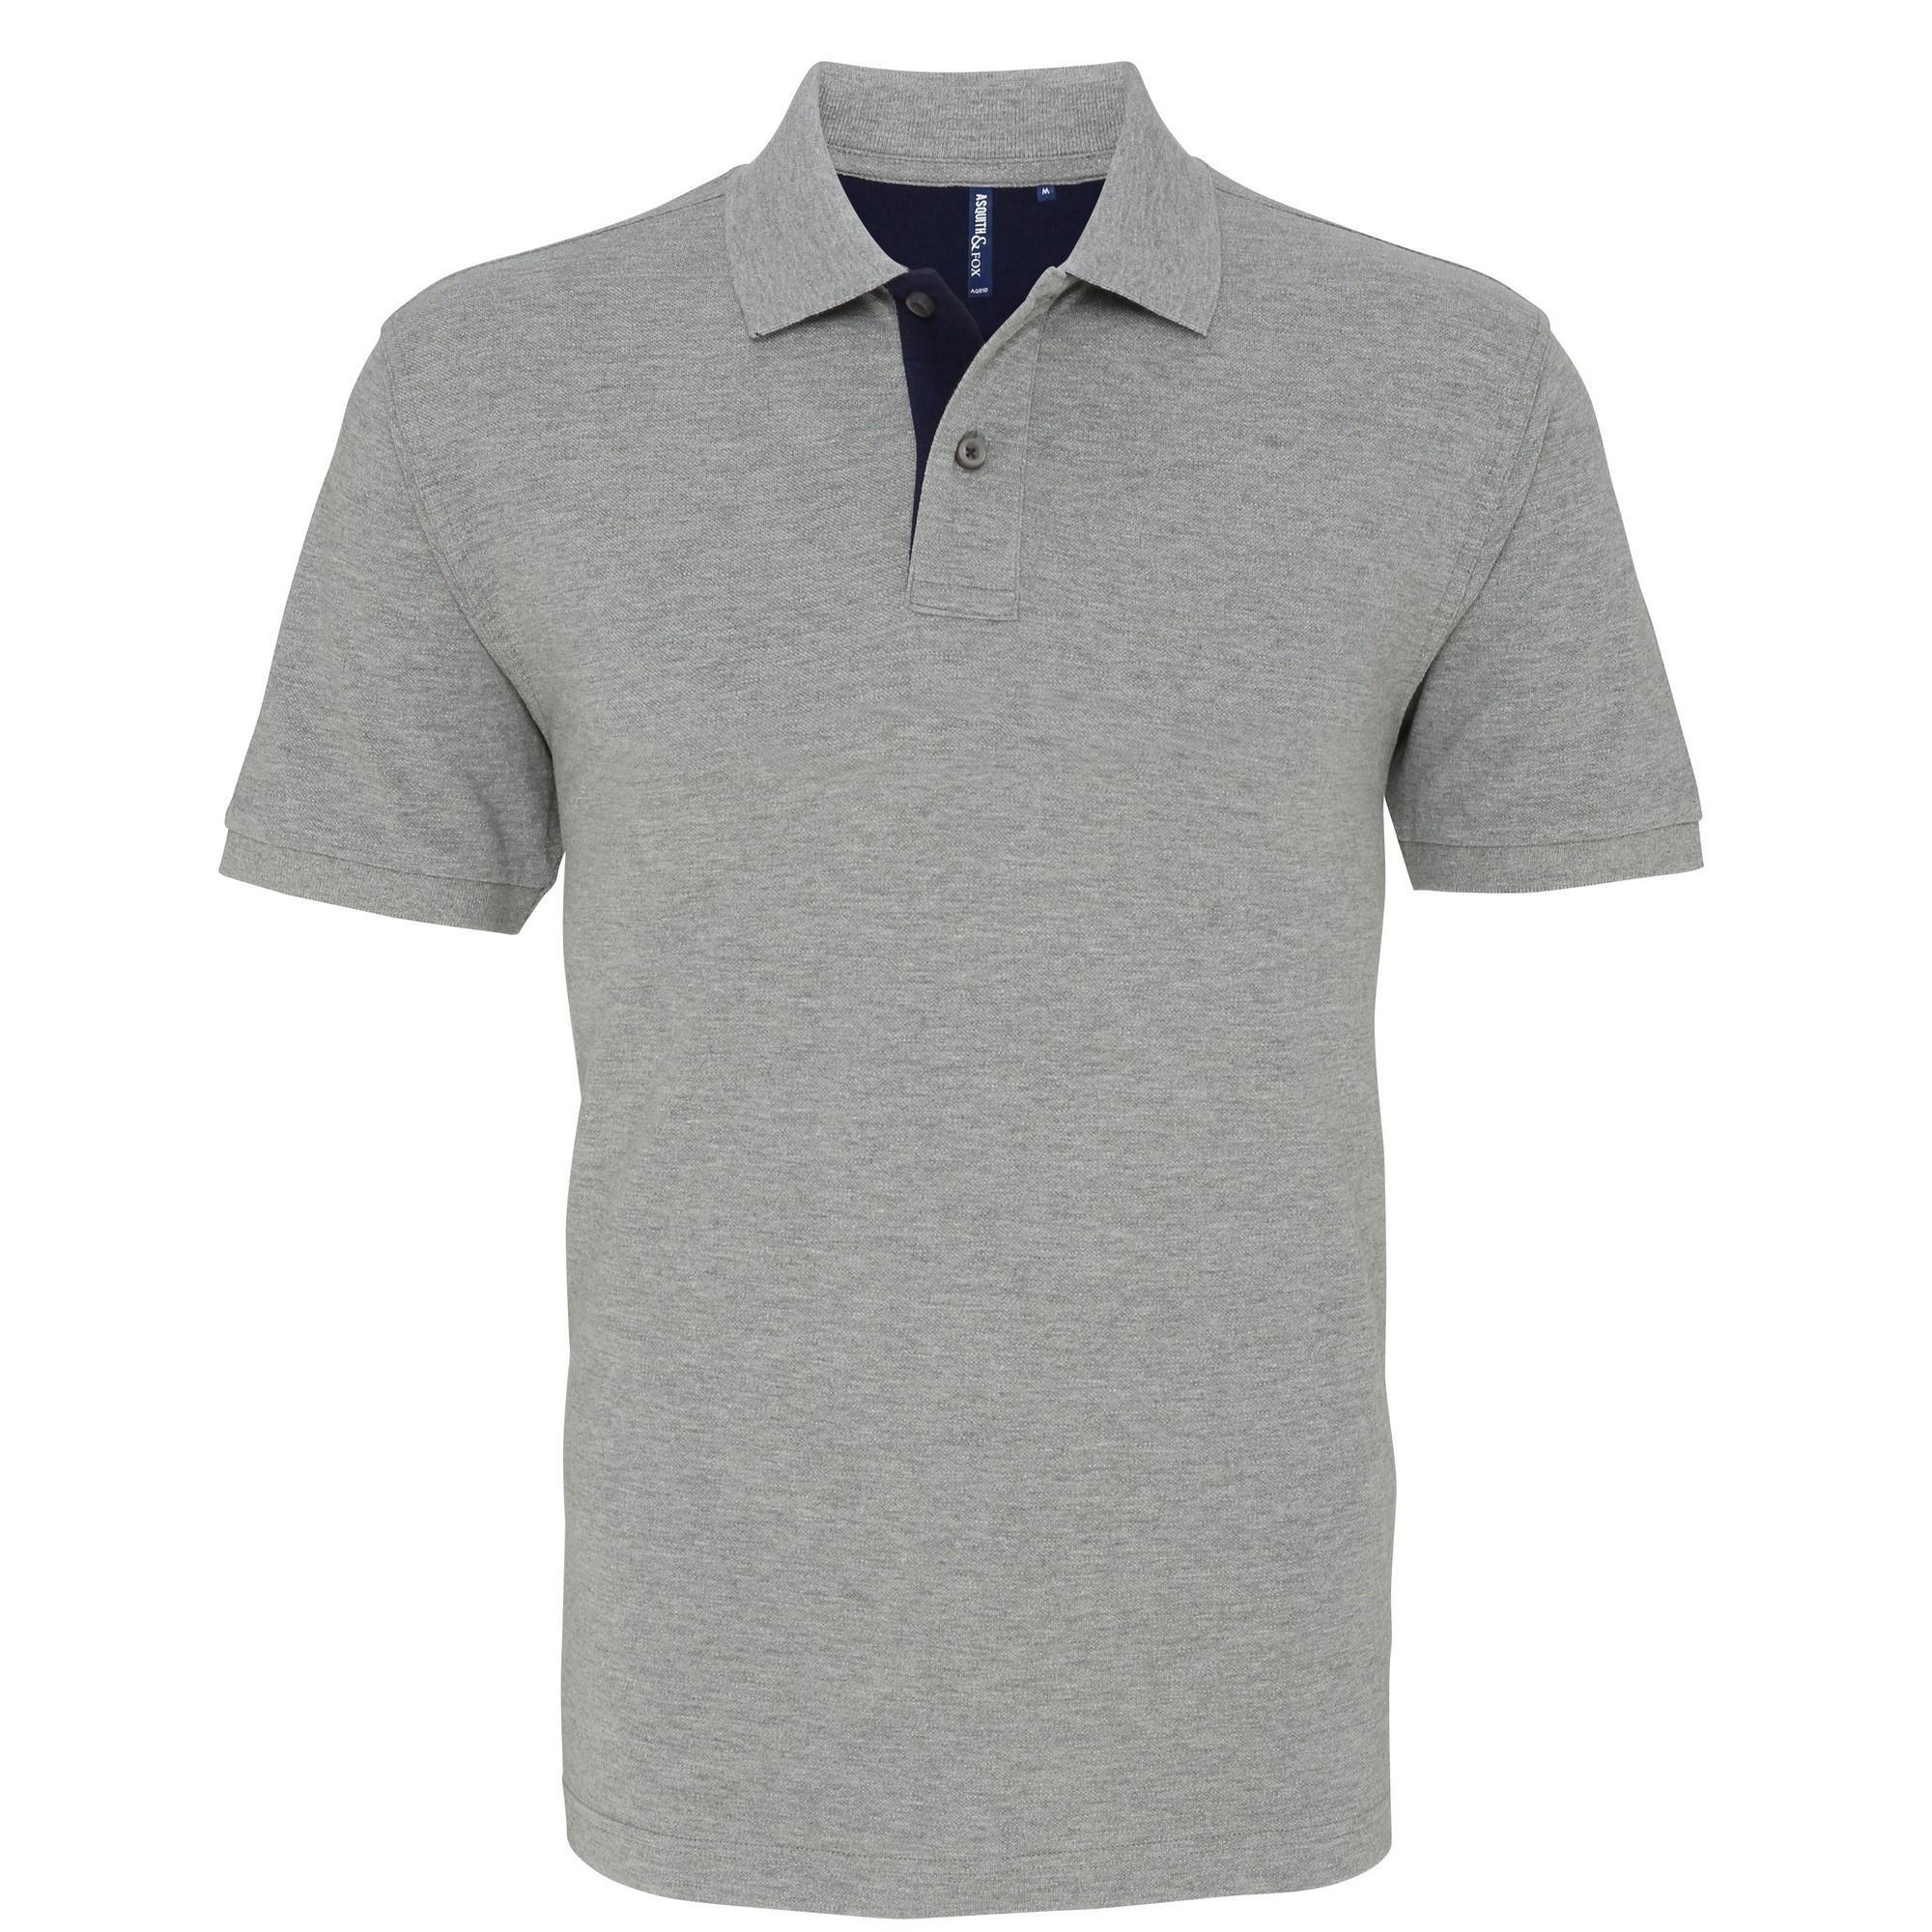 Asquith & Fox Mens Classic Fit Contrast Polo Shirt (Heather/ Navy) (L)